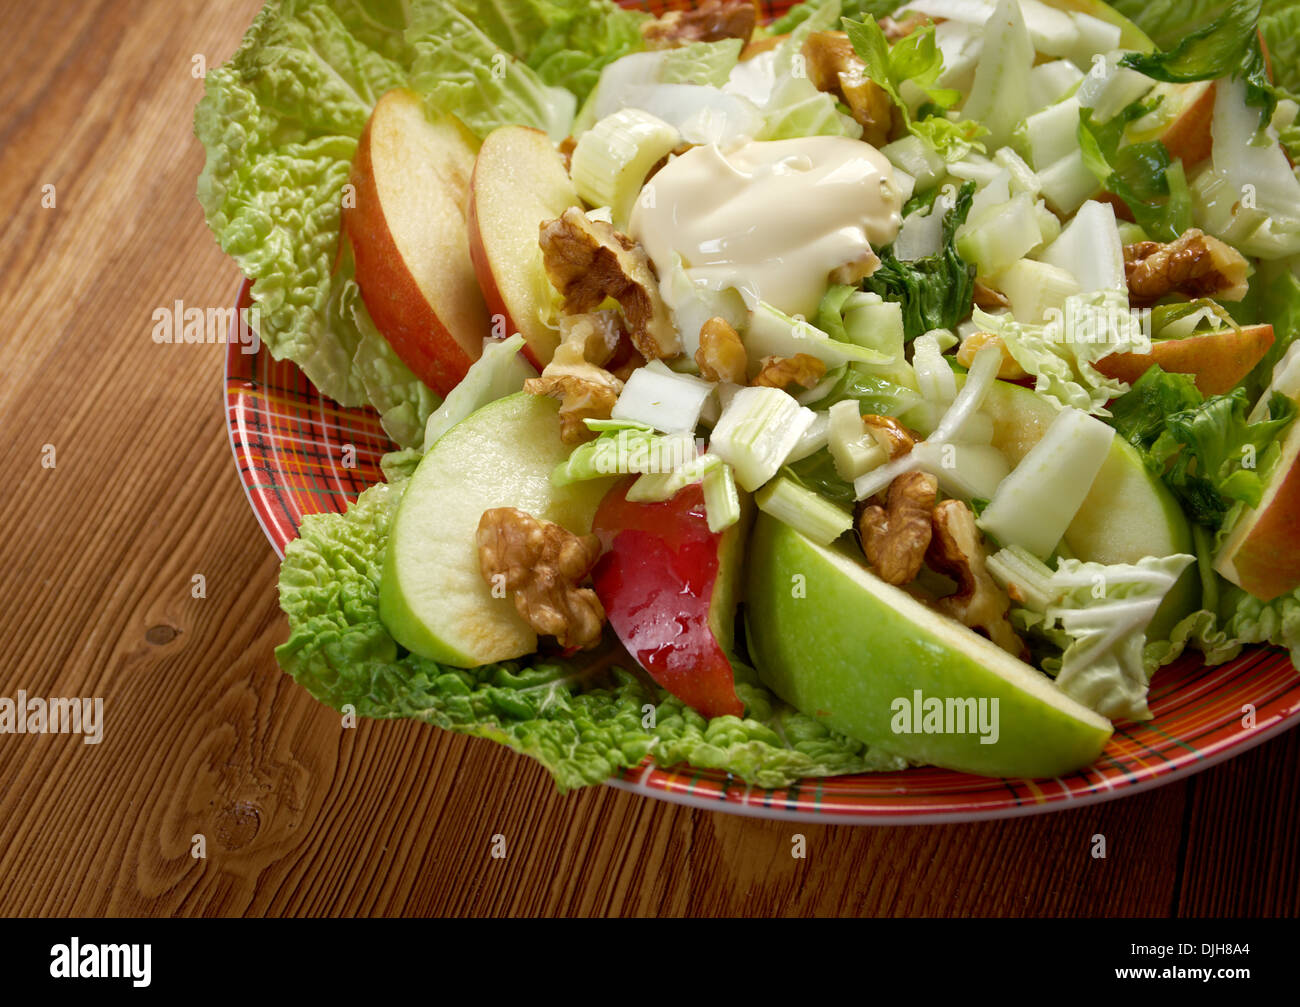 Waldorf salad made of fresh apples, celery and walnuts.farm-style Stock Photo